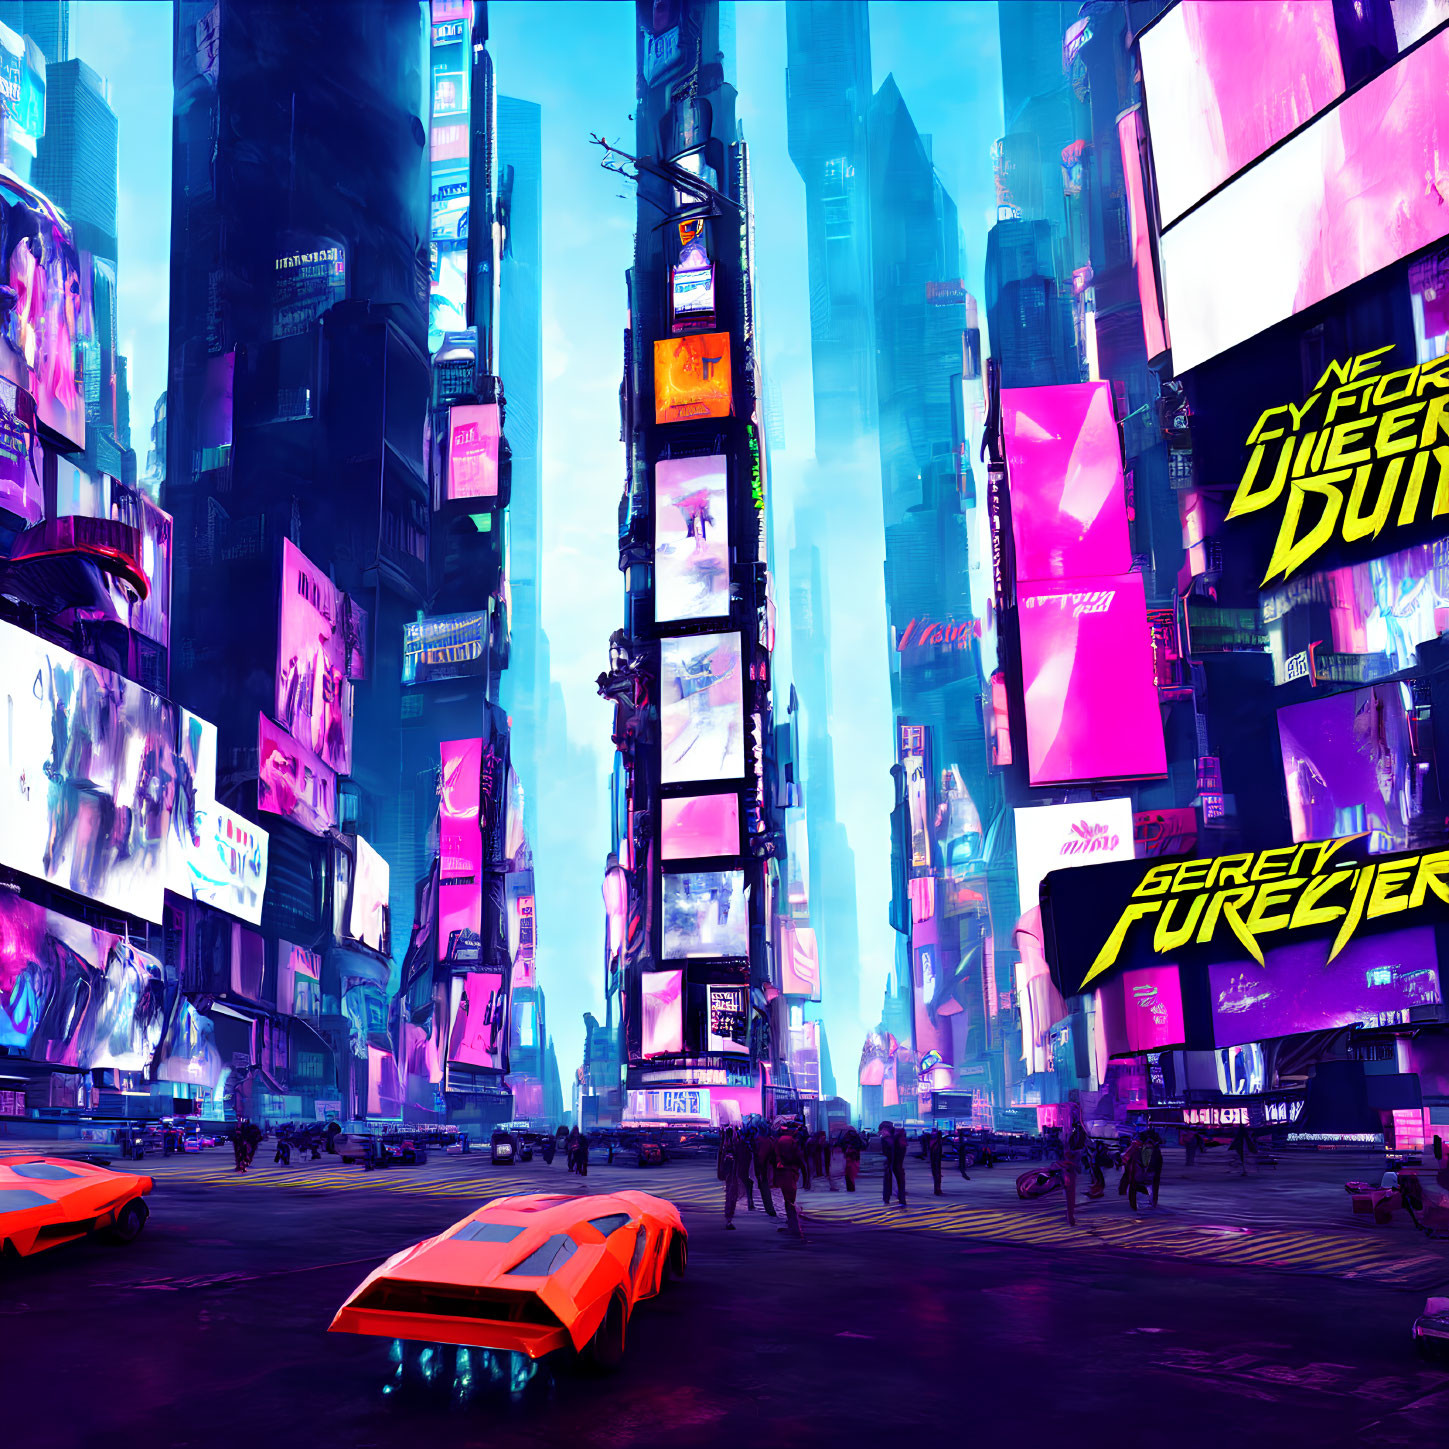 Futuristic cityscape with neon signs, skyscrapers, and flying cars at dusk